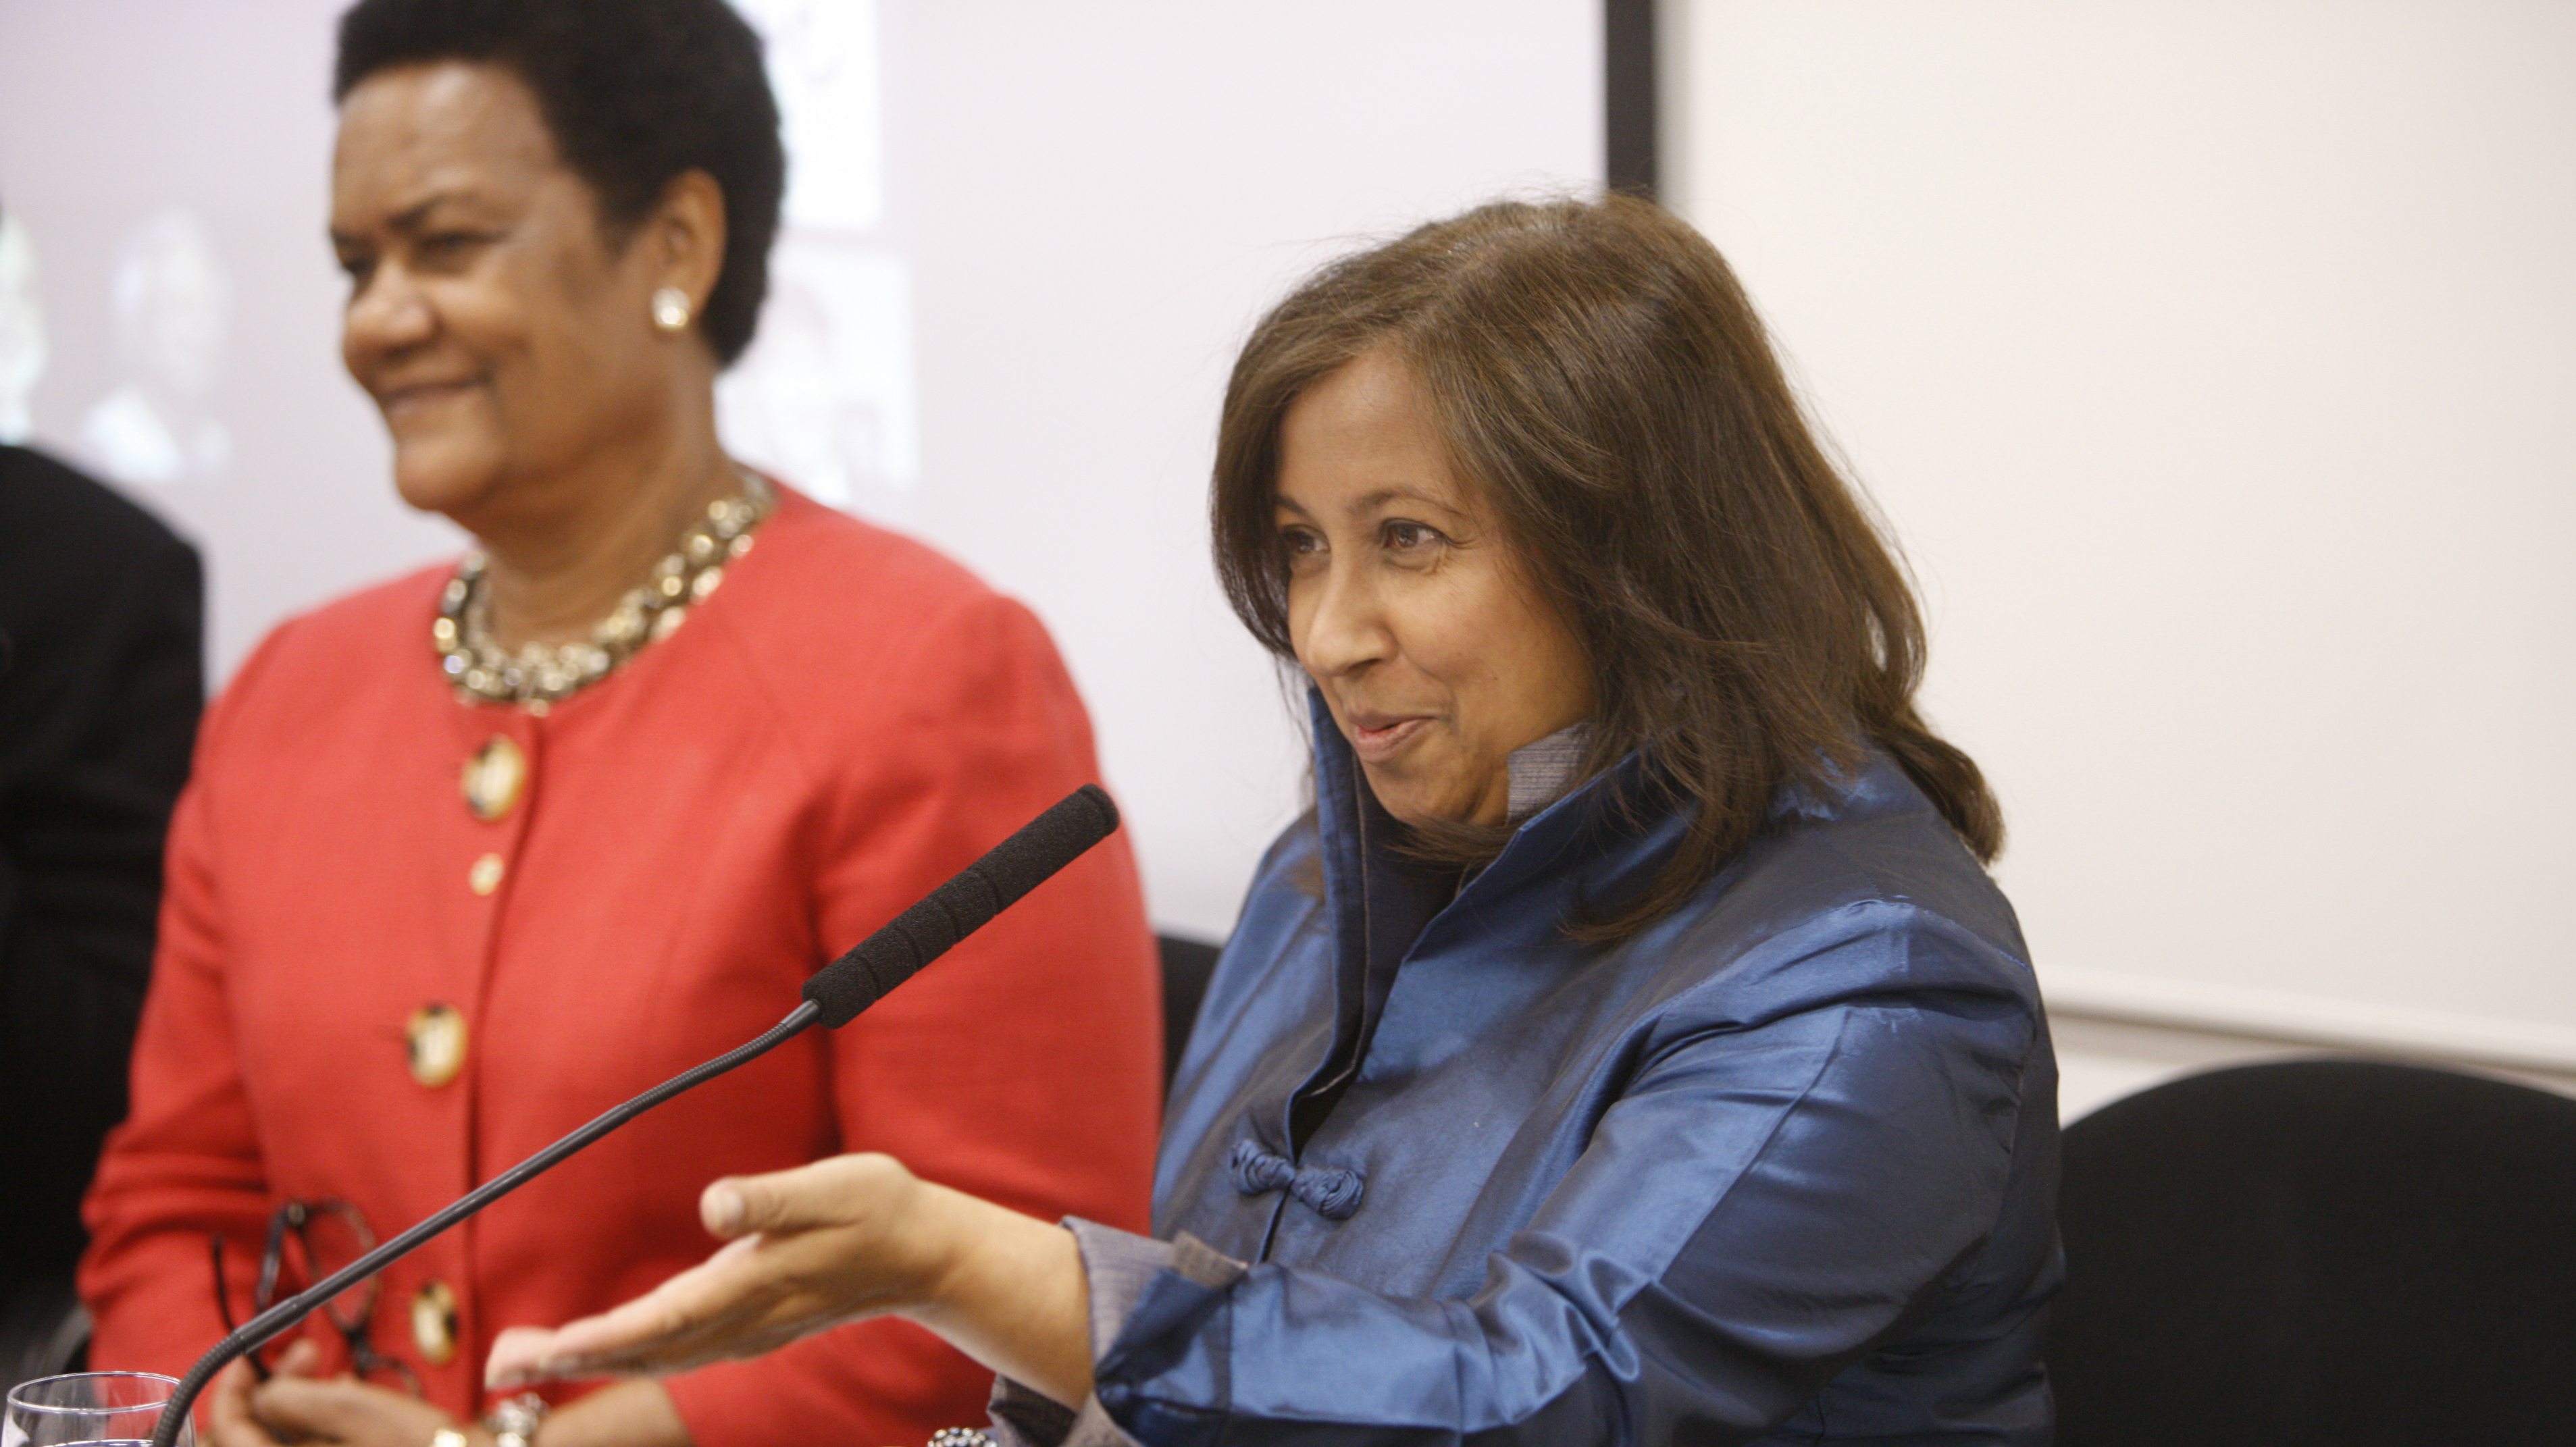 Two women are sat while contributing to a panel discussion